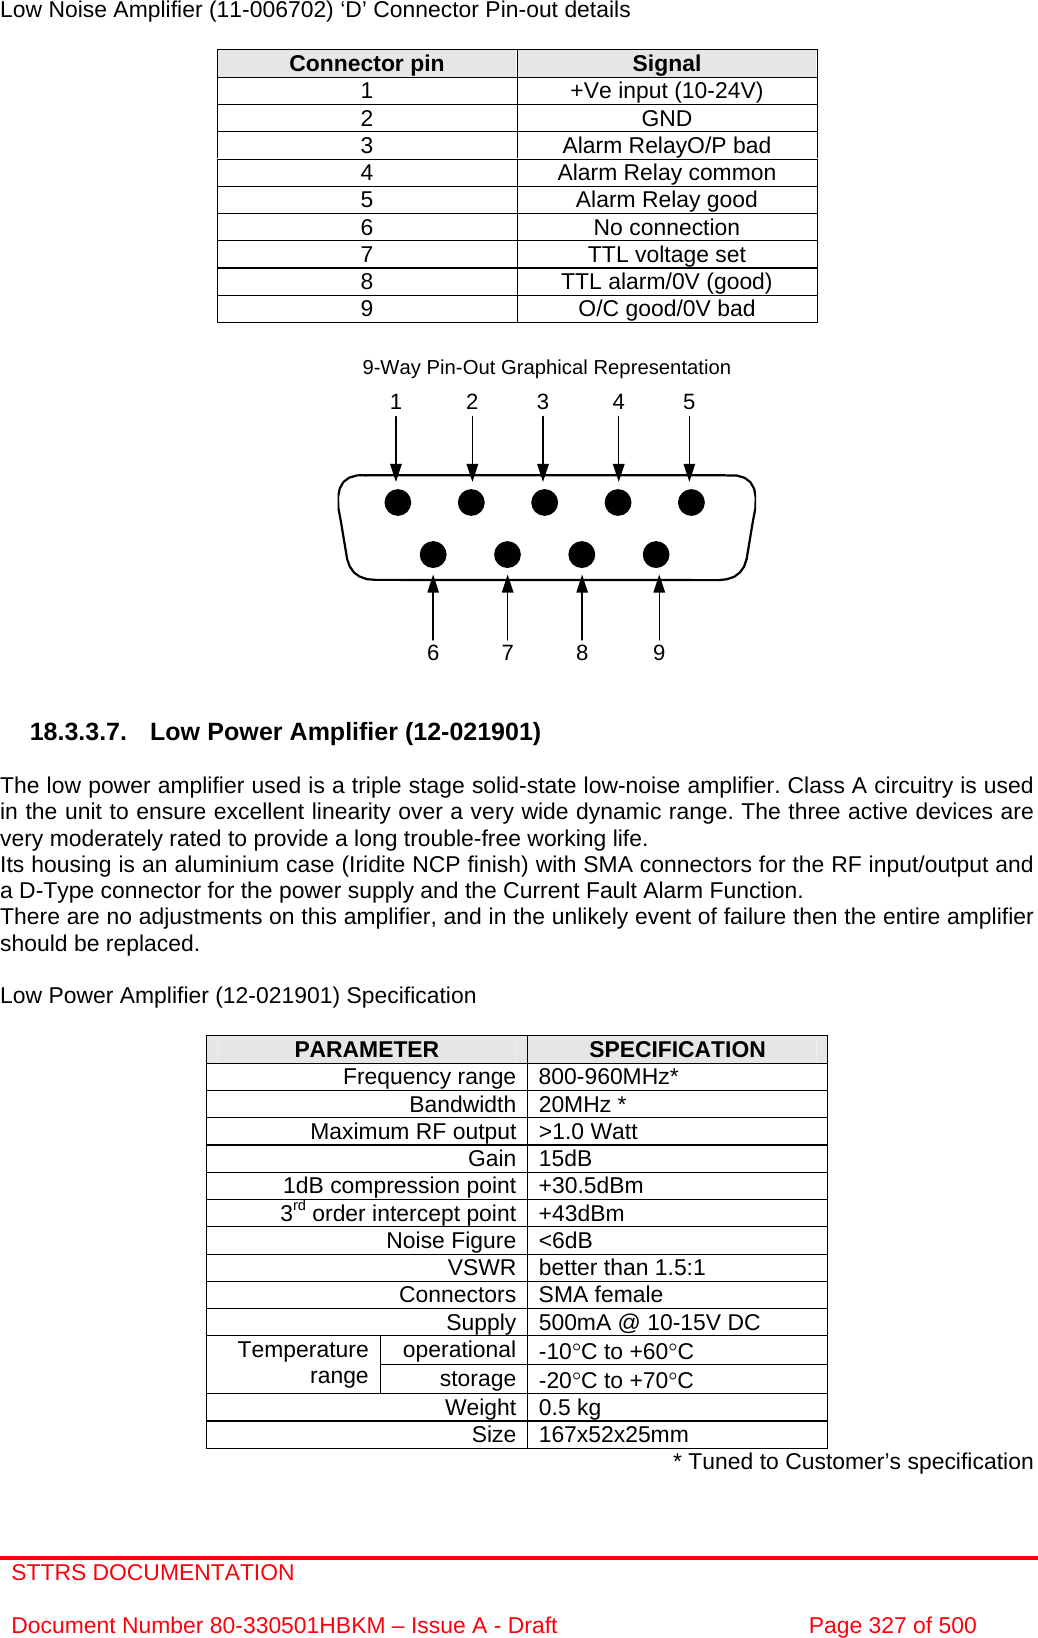 STTRS DOCUMENTATION  Document Number 80-330501HBKM – Issue A - Draft  Page 327 of 500  7 8 961 2 3 4 59-Way Pin-Out Graphical Representation Low Noise Amplifier (11-006702) ‘D’ Connector Pin-out details  Connector pin  Signal 1  +Ve input (10-24V) 2 GND 3  Alarm RelayO/P bad 4  Alarm Relay common 5  Alarm Relay good 6 No connection 7  TTL voltage set 8  TTL alarm/0V (good) 9  O/C good/0V bad                18.3.3.7.  Low Power Amplifier (12-021901)  The low power amplifier used is a triple stage solid-state low-noise amplifier. Class A circuitry is used in the unit to ensure excellent linearity over a very wide dynamic range. The three active devices are very moderately rated to provide a long trouble-free working life.  Its housing is an aluminium case (Iridite NCP finish) with SMA connectors for the RF input/output and a D-Type connector for the power supply and the Current Fault Alarm Function. There are no adjustments on this amplifier, and in the unlikely event of failure then the entire amplifier should be replaced.  Low Power Amplifier (12-021901) Specification  PARAMETER  SPECIFICATION Frequency range 800-960MHz* Bandwidth 20MHz * Maximum RF output &gt;1.0 Watt Gain 15dB 1dB compression point +30.5dBm 3rd order intercept point +43dBm Noise Figure &lt;6dB VSWR better than 1.5:1 Connectors SMA female Supply 500mA @ 10-15V DC operational -10°C to +60°C Temperature range  storage -20°C to +70°C Weight 0.5 kg Size 167x52x25mm * Tuned to Customer’s specification 